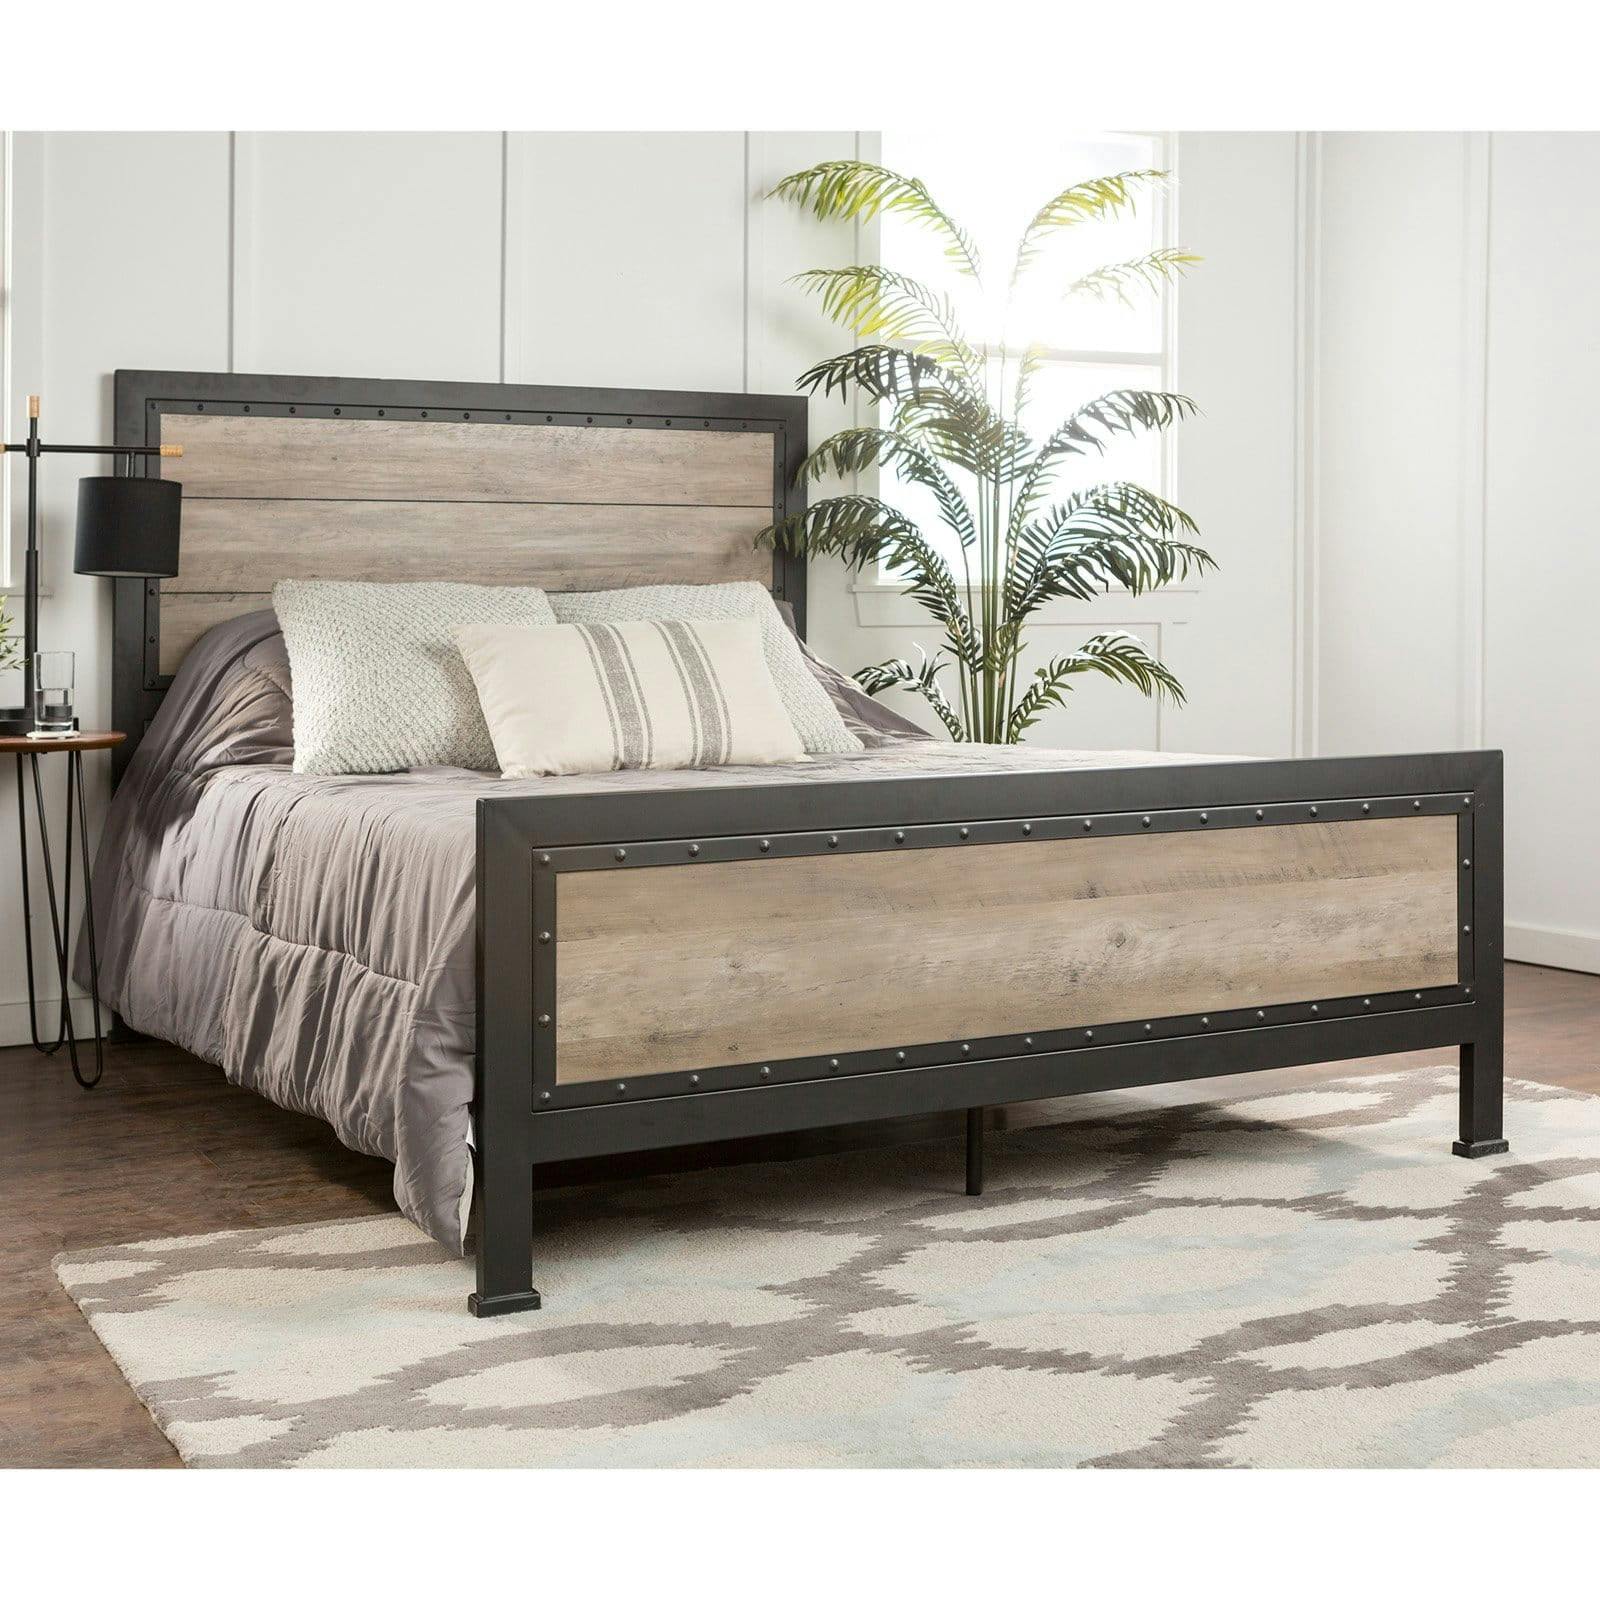 Rustic Industrial Queen Panel Bed with Wood Accents, Grey Wash